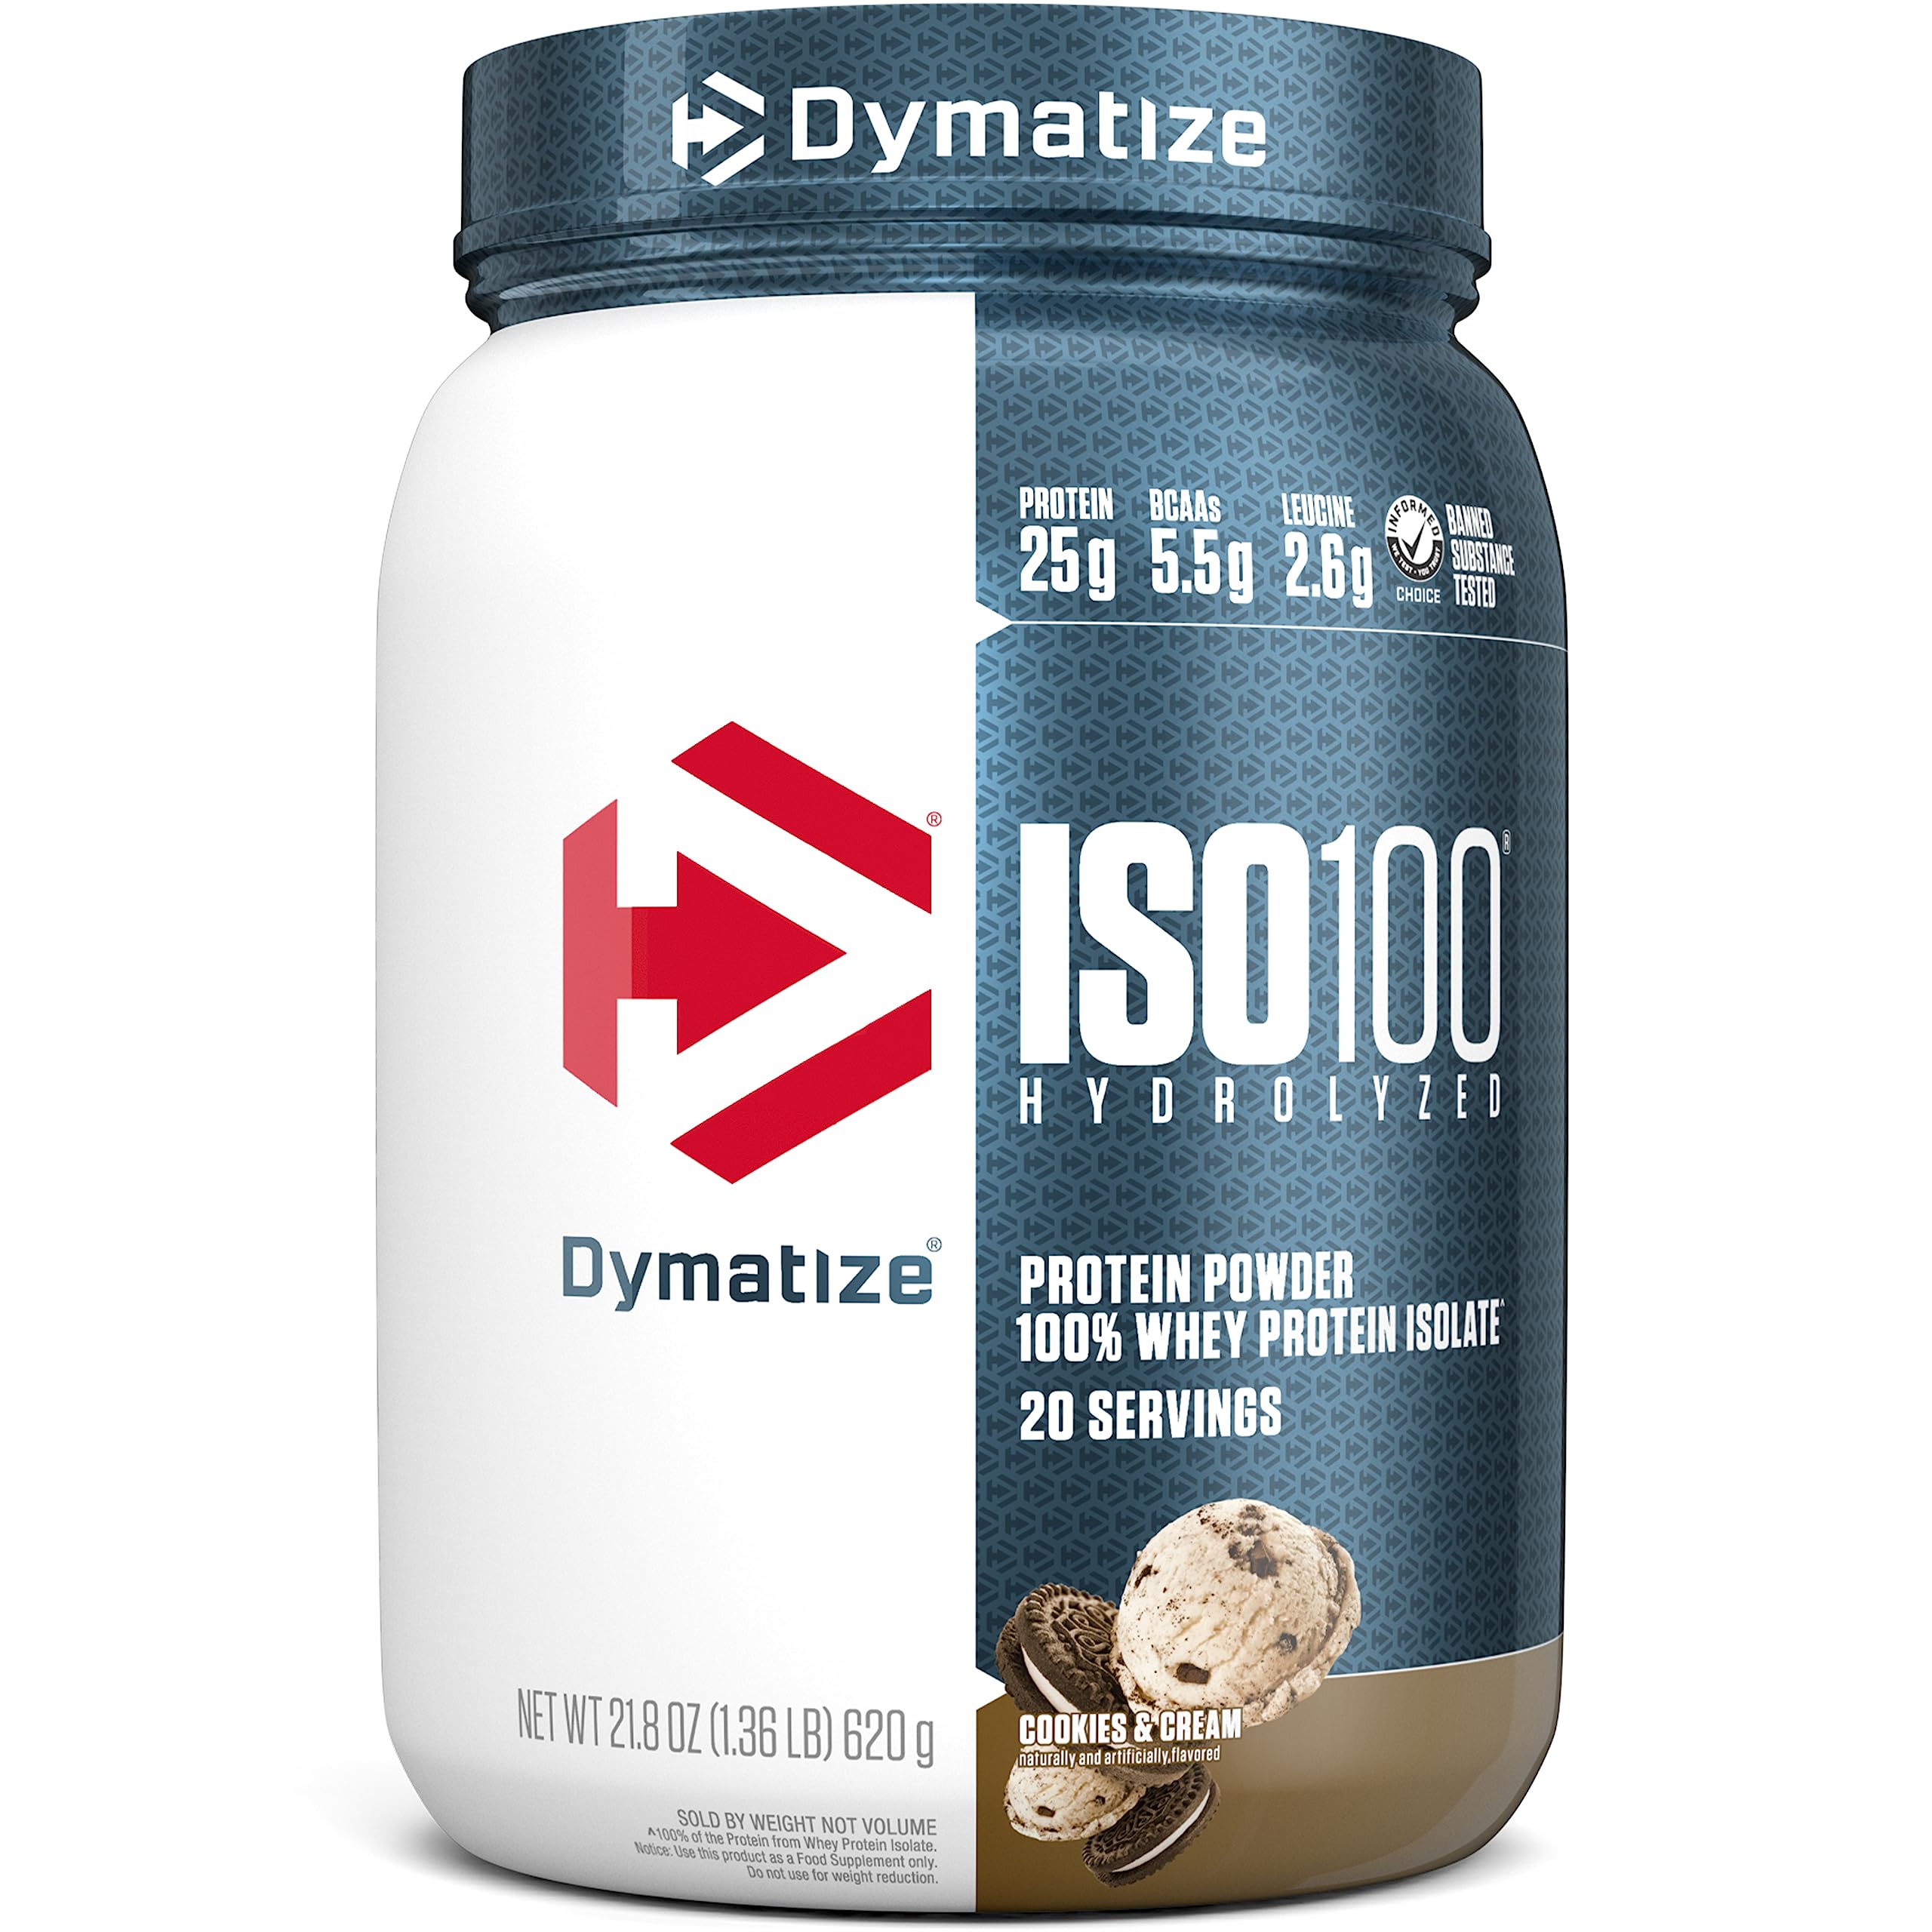 Dymatize ISO100 Hydrolyzed Protein Powder, 100% Whey Isolate Protein, 25g of Protein, 5.5g BCAAs, Gluten Free, Fast Absorbing, Easy Digesting, Cookies and Cream, 20 Servings